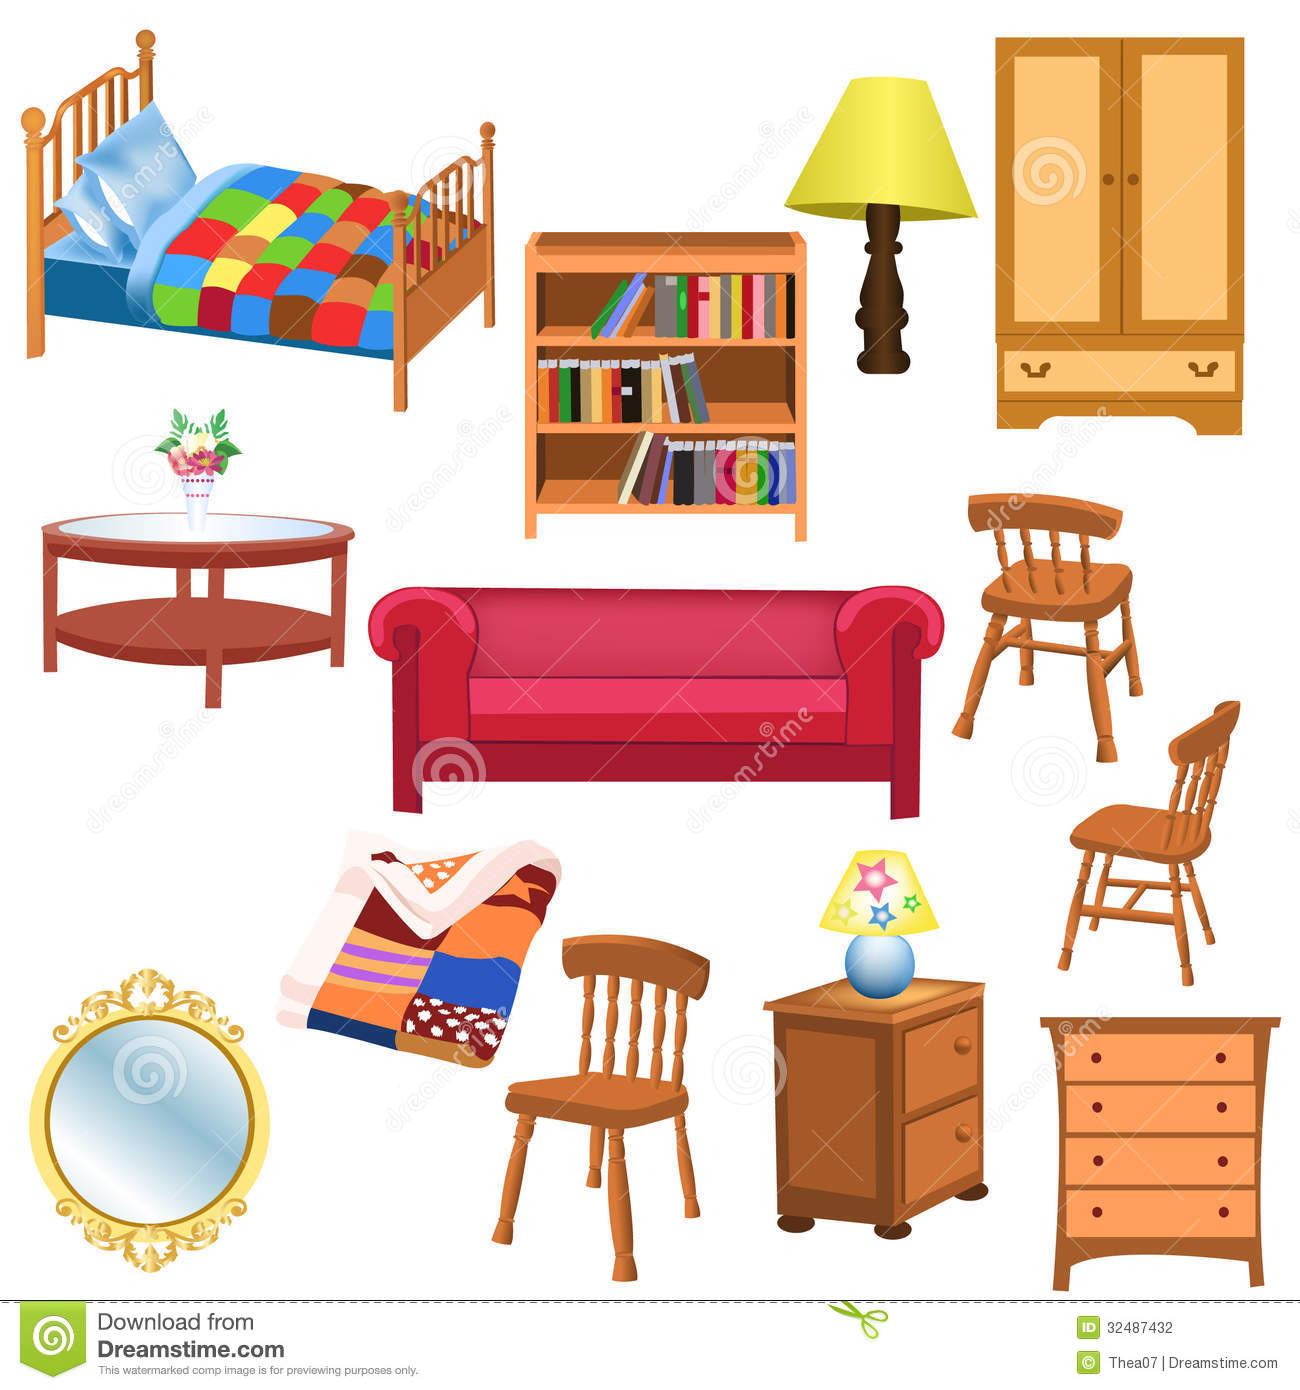 House things clipart.